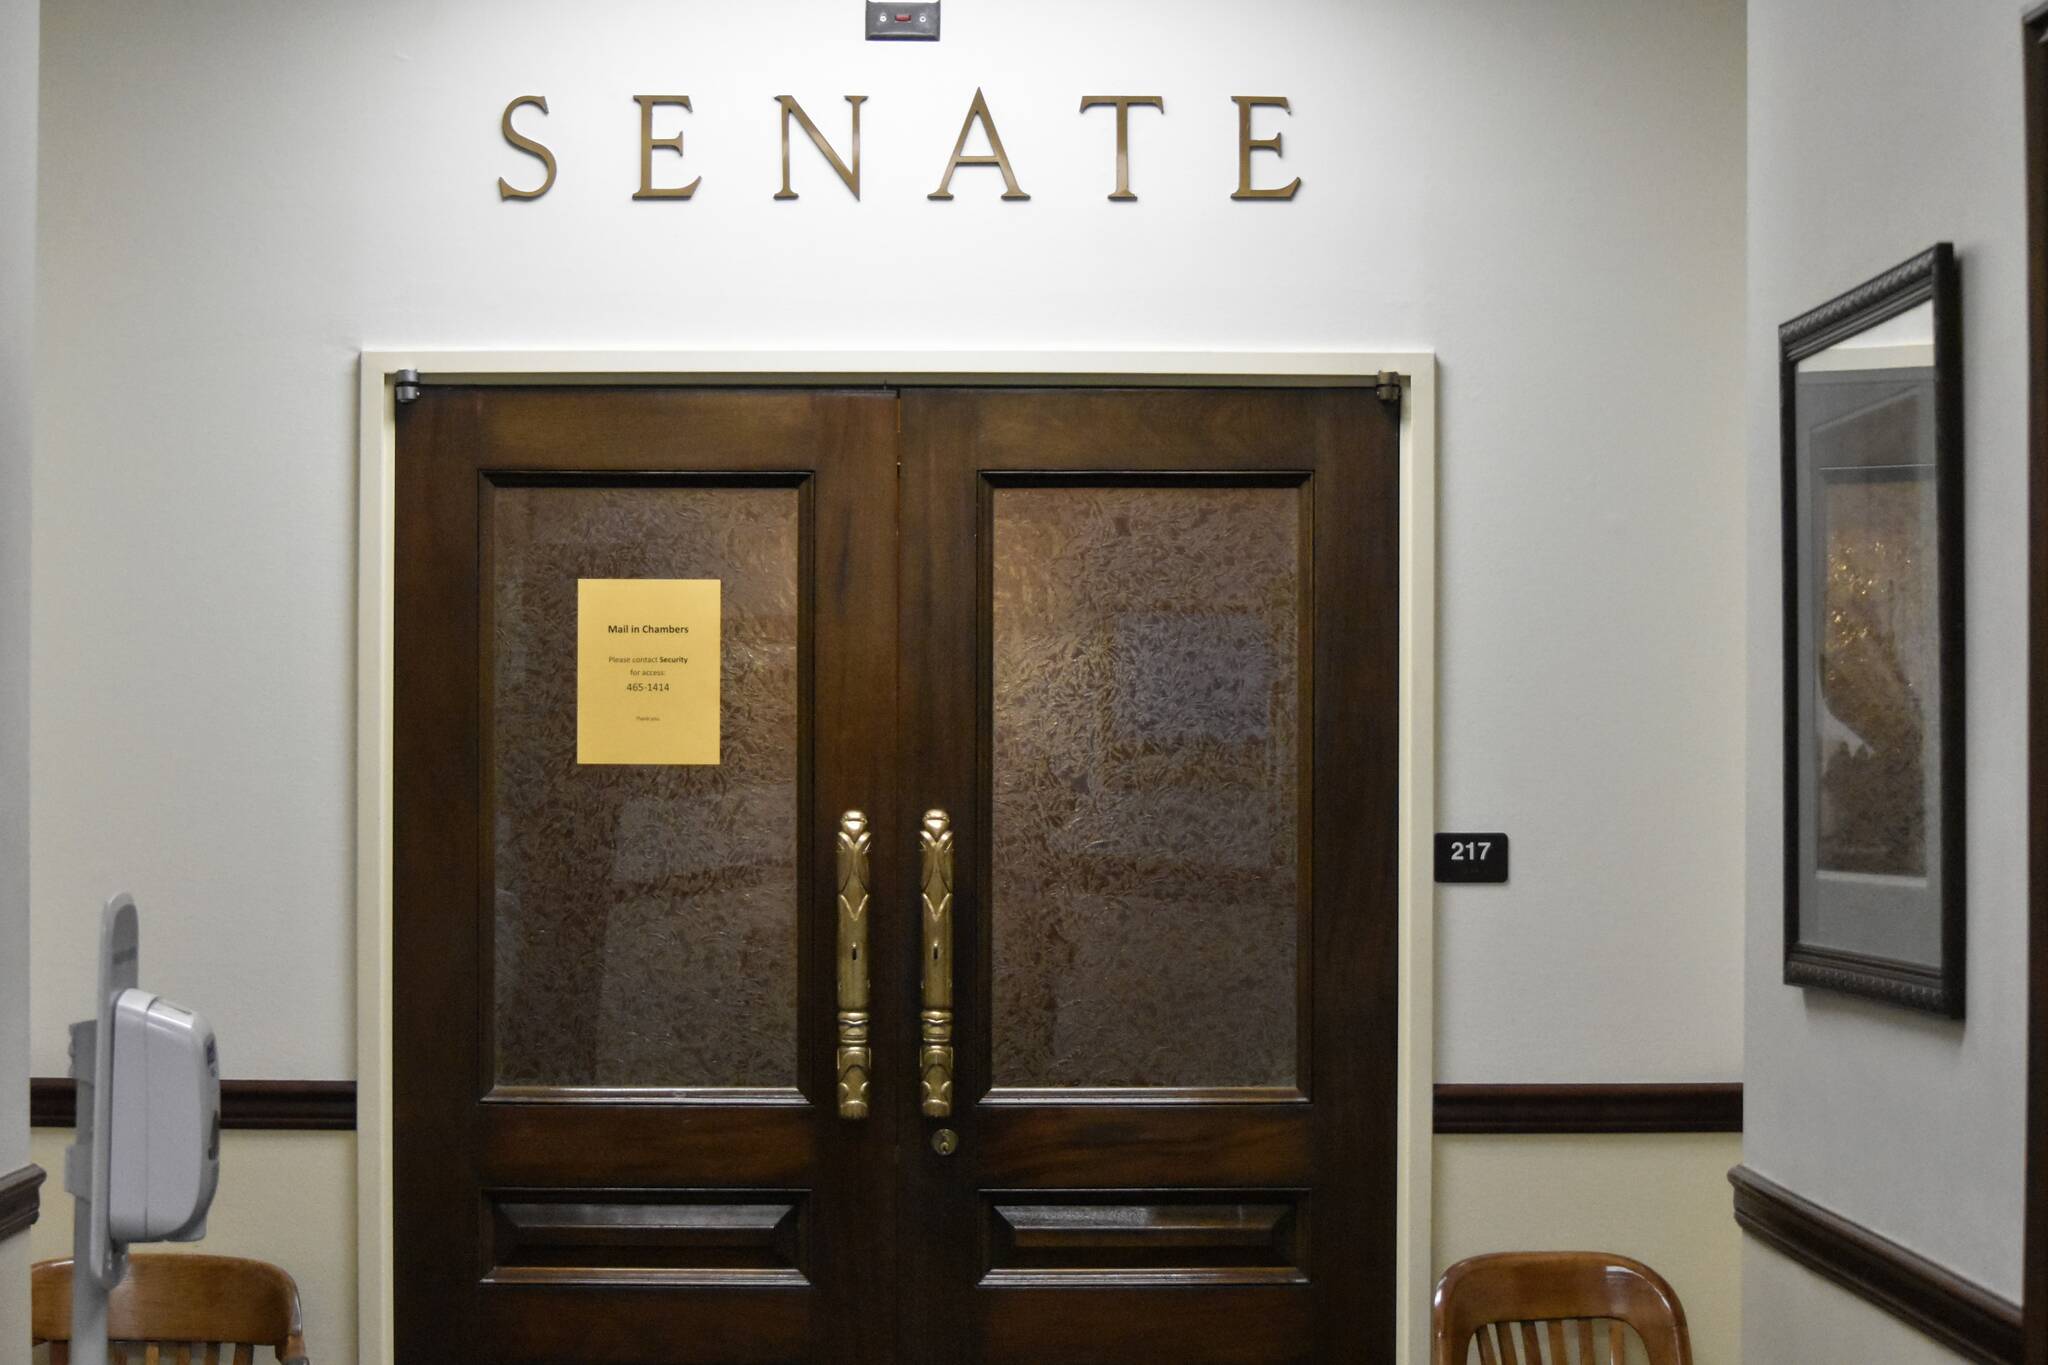 The doors of the Alaska Senate chambers were shut Friday, Oct. 8, 2021, a week into the Alaska State Legislature's fourth special session of the year. Gov. Mike Dunleavy called lawmakers to session to resolve the state's longterm fiscal issues, but the same divisions that have kept lawmakers from finding resolution before are still in place. (Peter Segall / Juneau Empire)